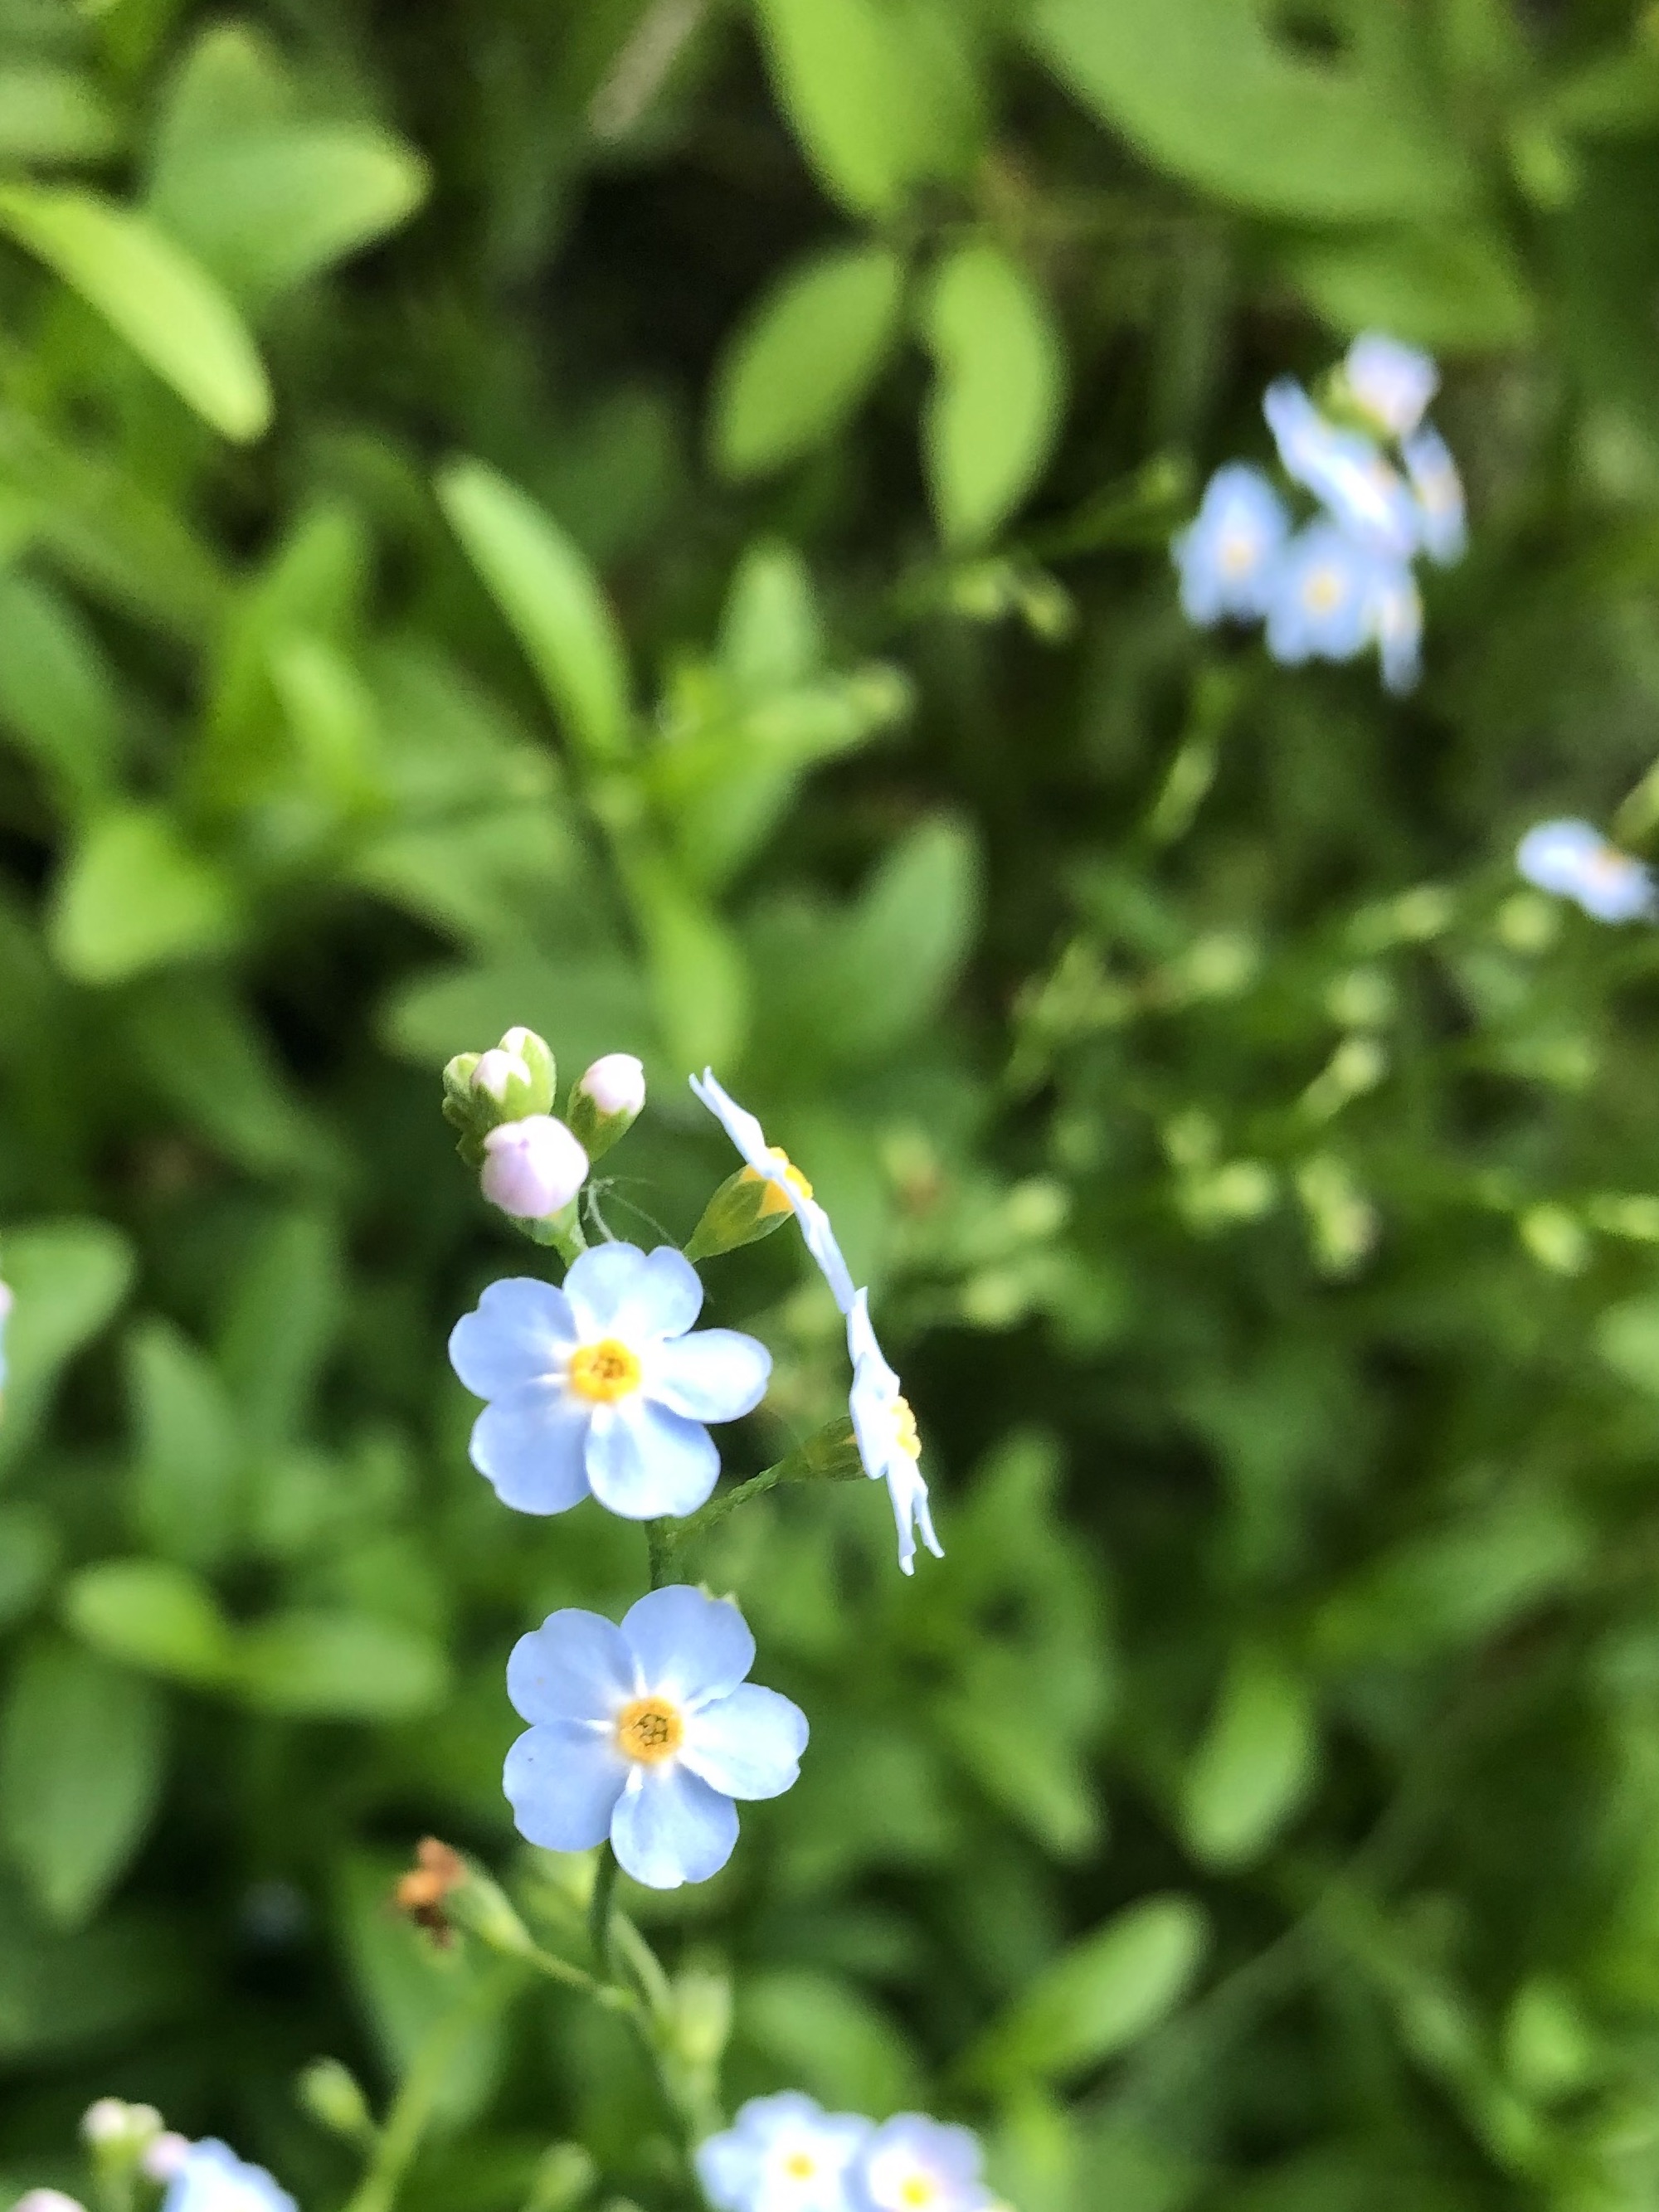 True Forget-me-not near cattails at Pickford Street stormwater outflow into Lake Wingra in Madison, Wisconsin on June 19, 2020.